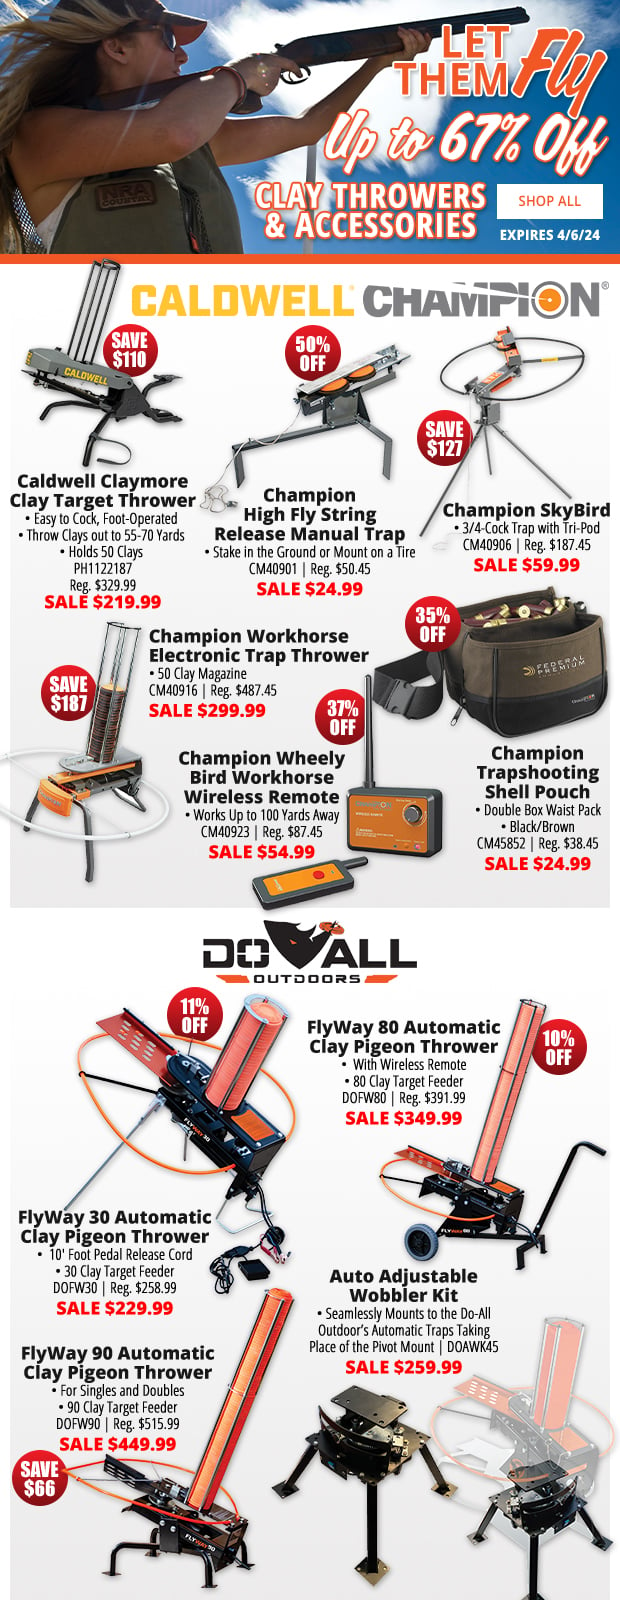 Up to 67% Off Clay Throwers & Accessories!